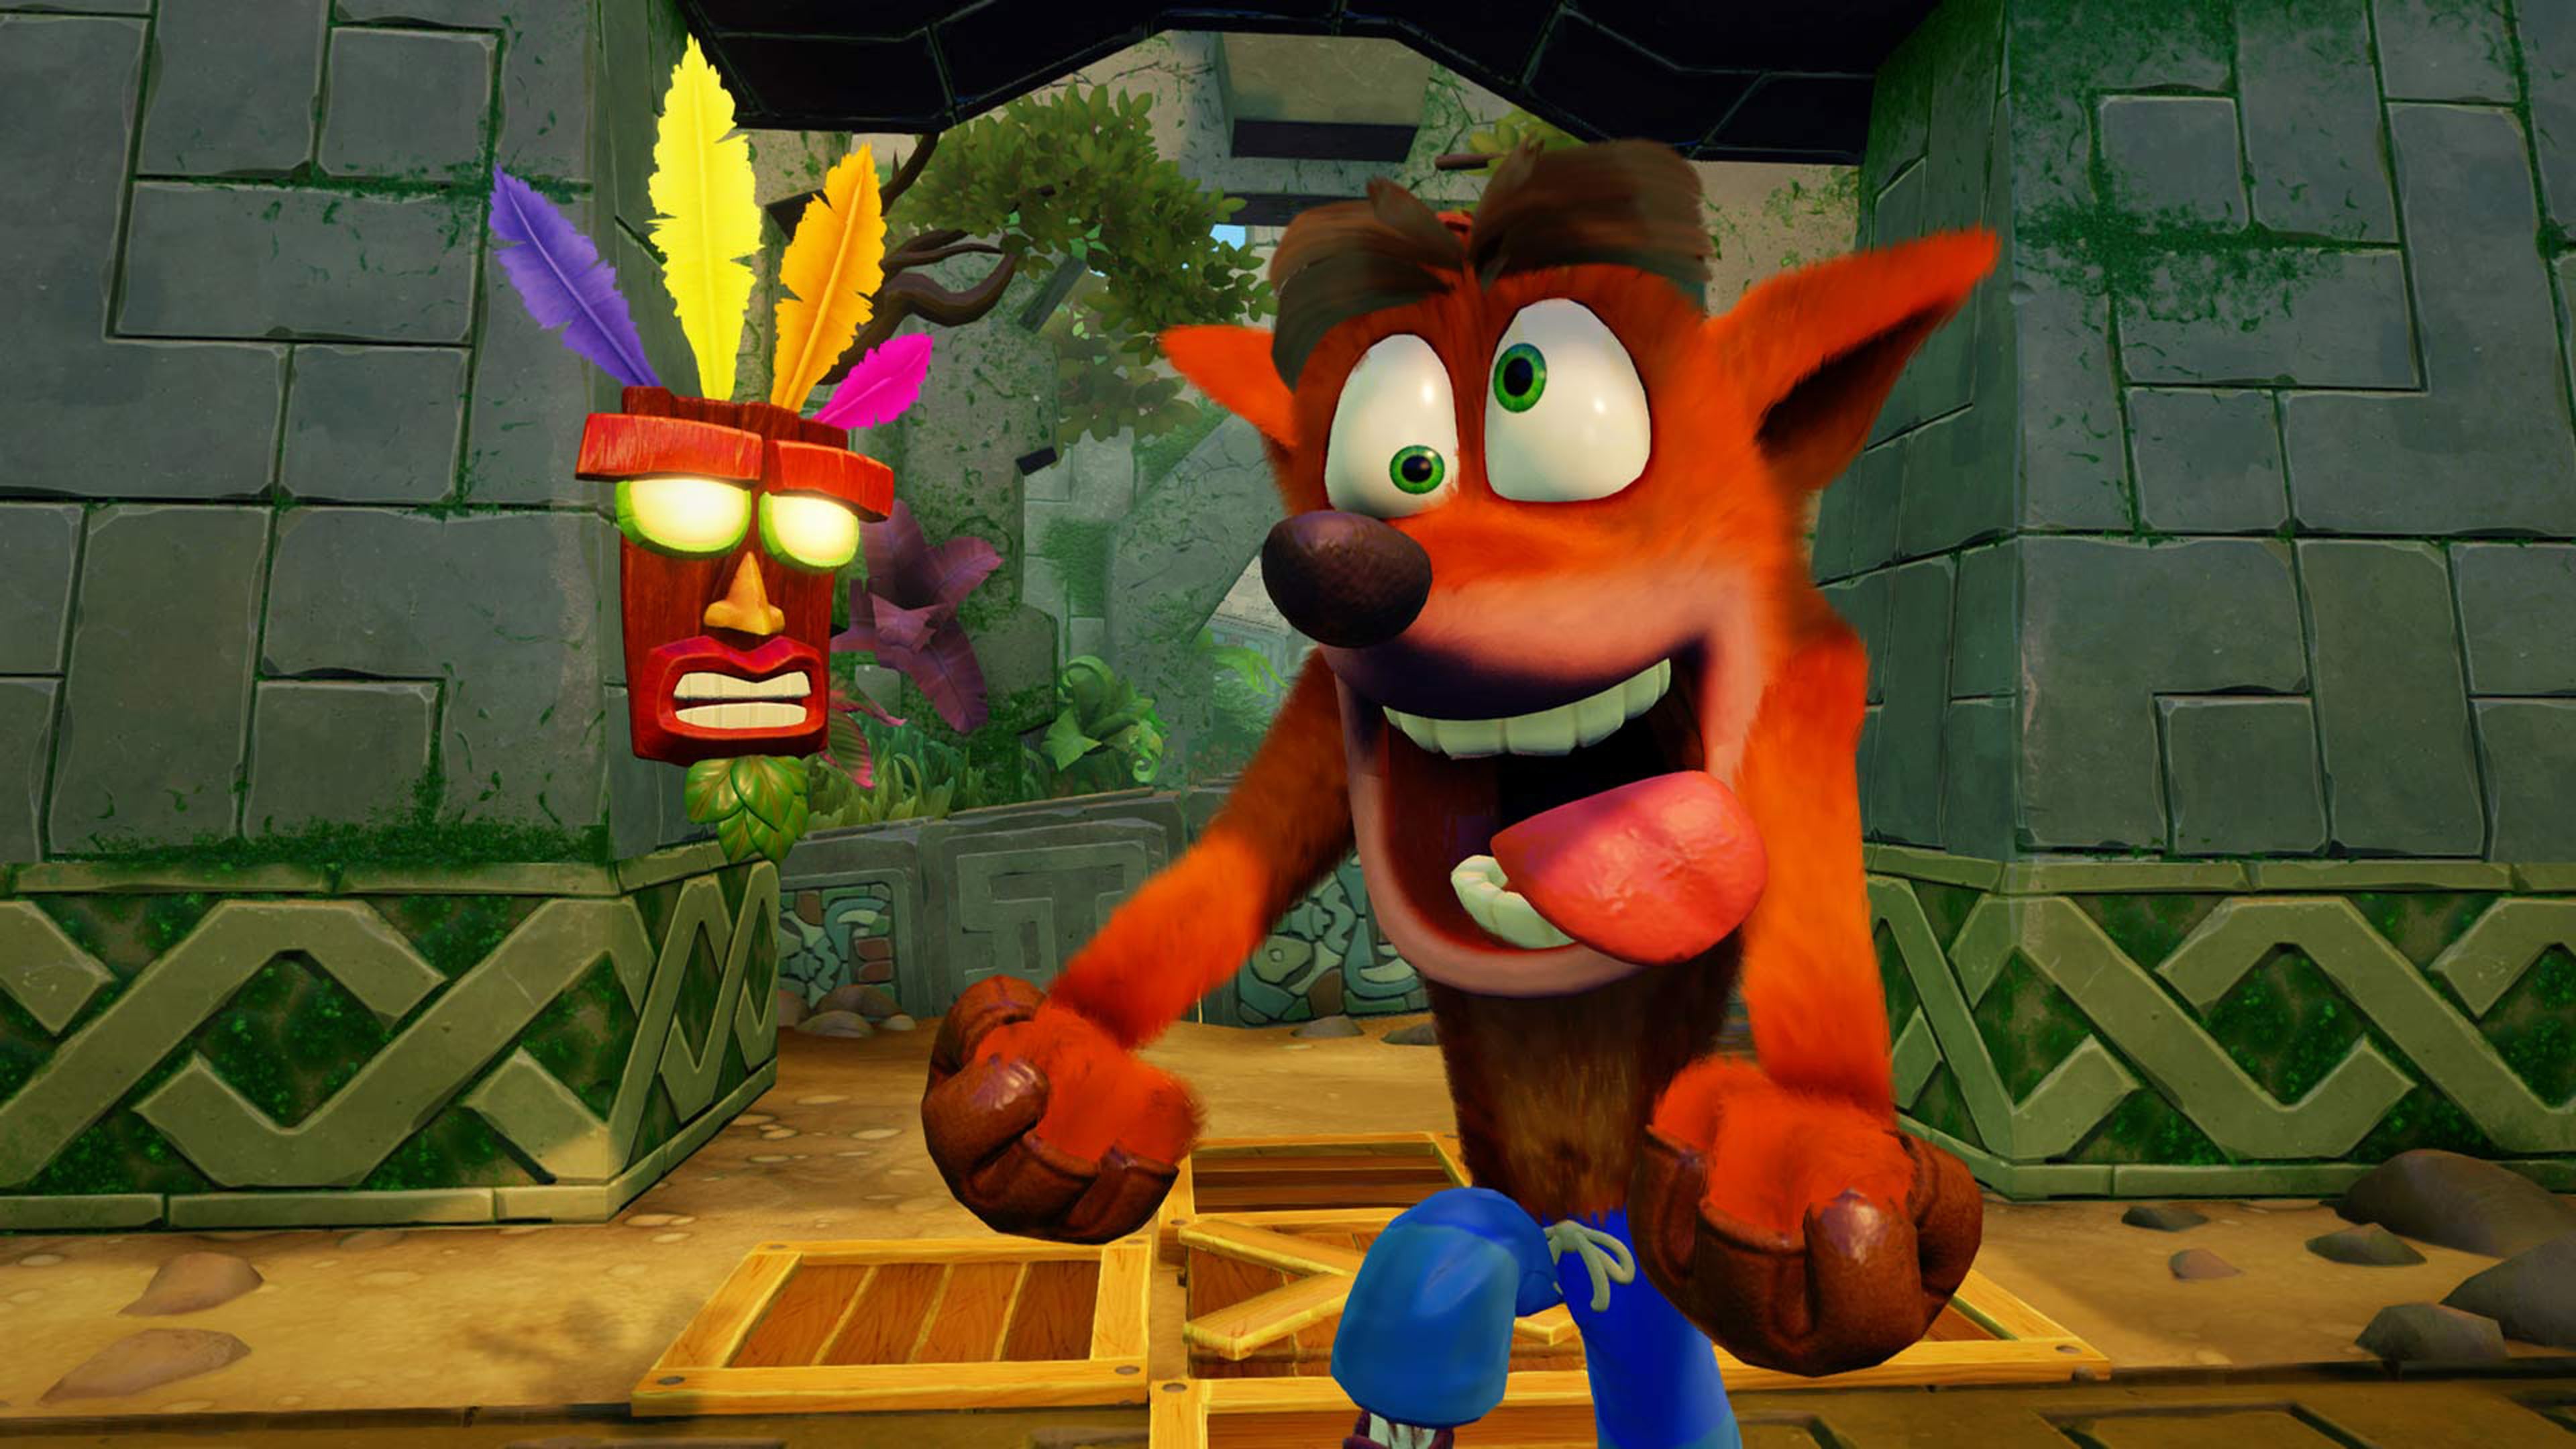 Crash Bandicoot 4: It's About Time PlayStation 4, PlayStation 5